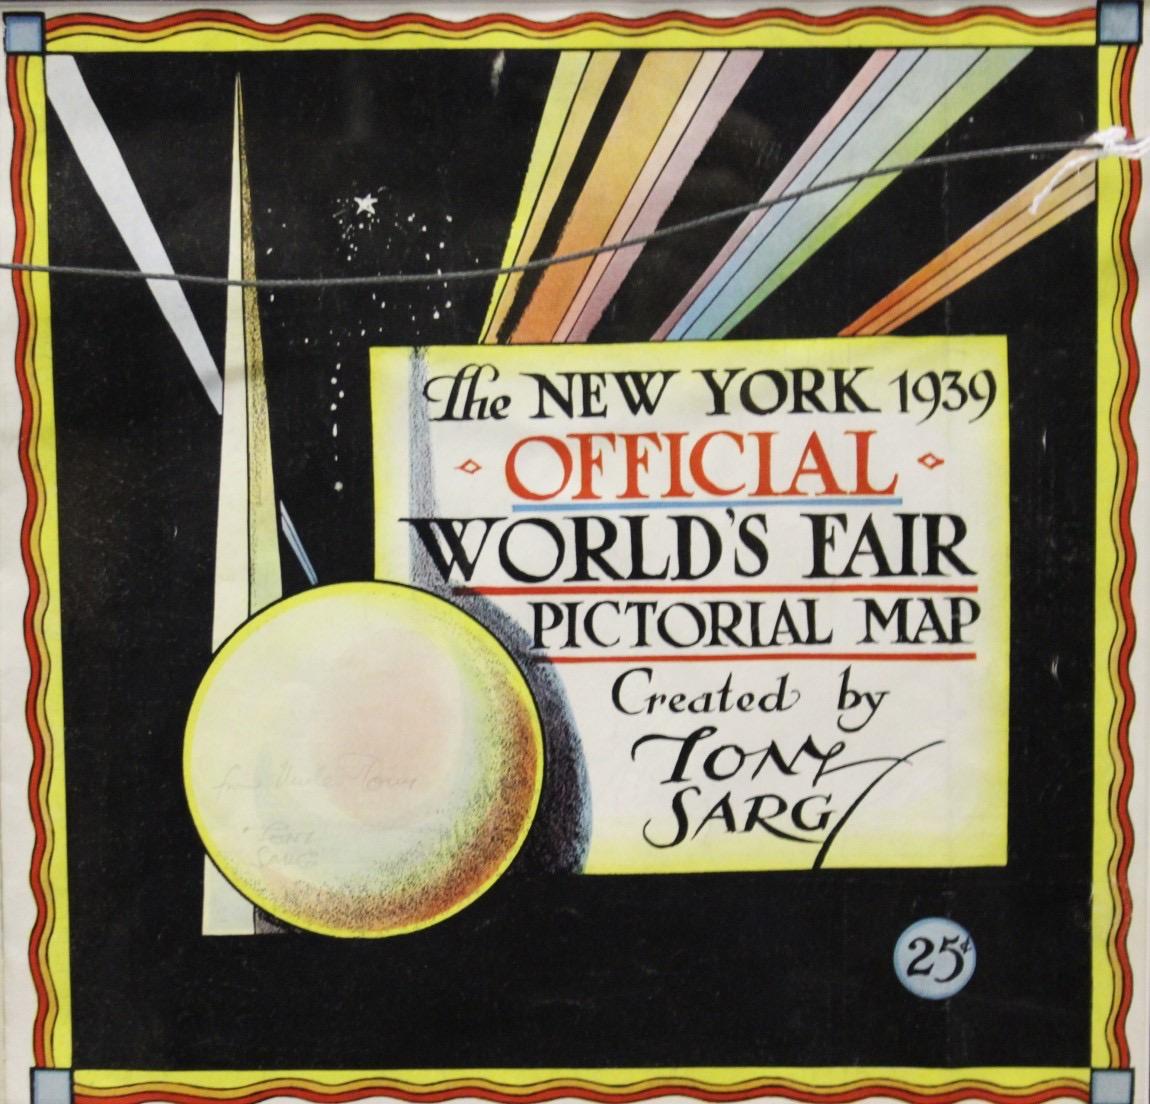 Classic original double-sided (custom framed) colour map by Tony Sarg (1880-1942) for the New York 1939 World's Fair
Pencil signed: From 'Uncle' Tony, Tong Sarg on right Moon on verso 

Art Sz: 11